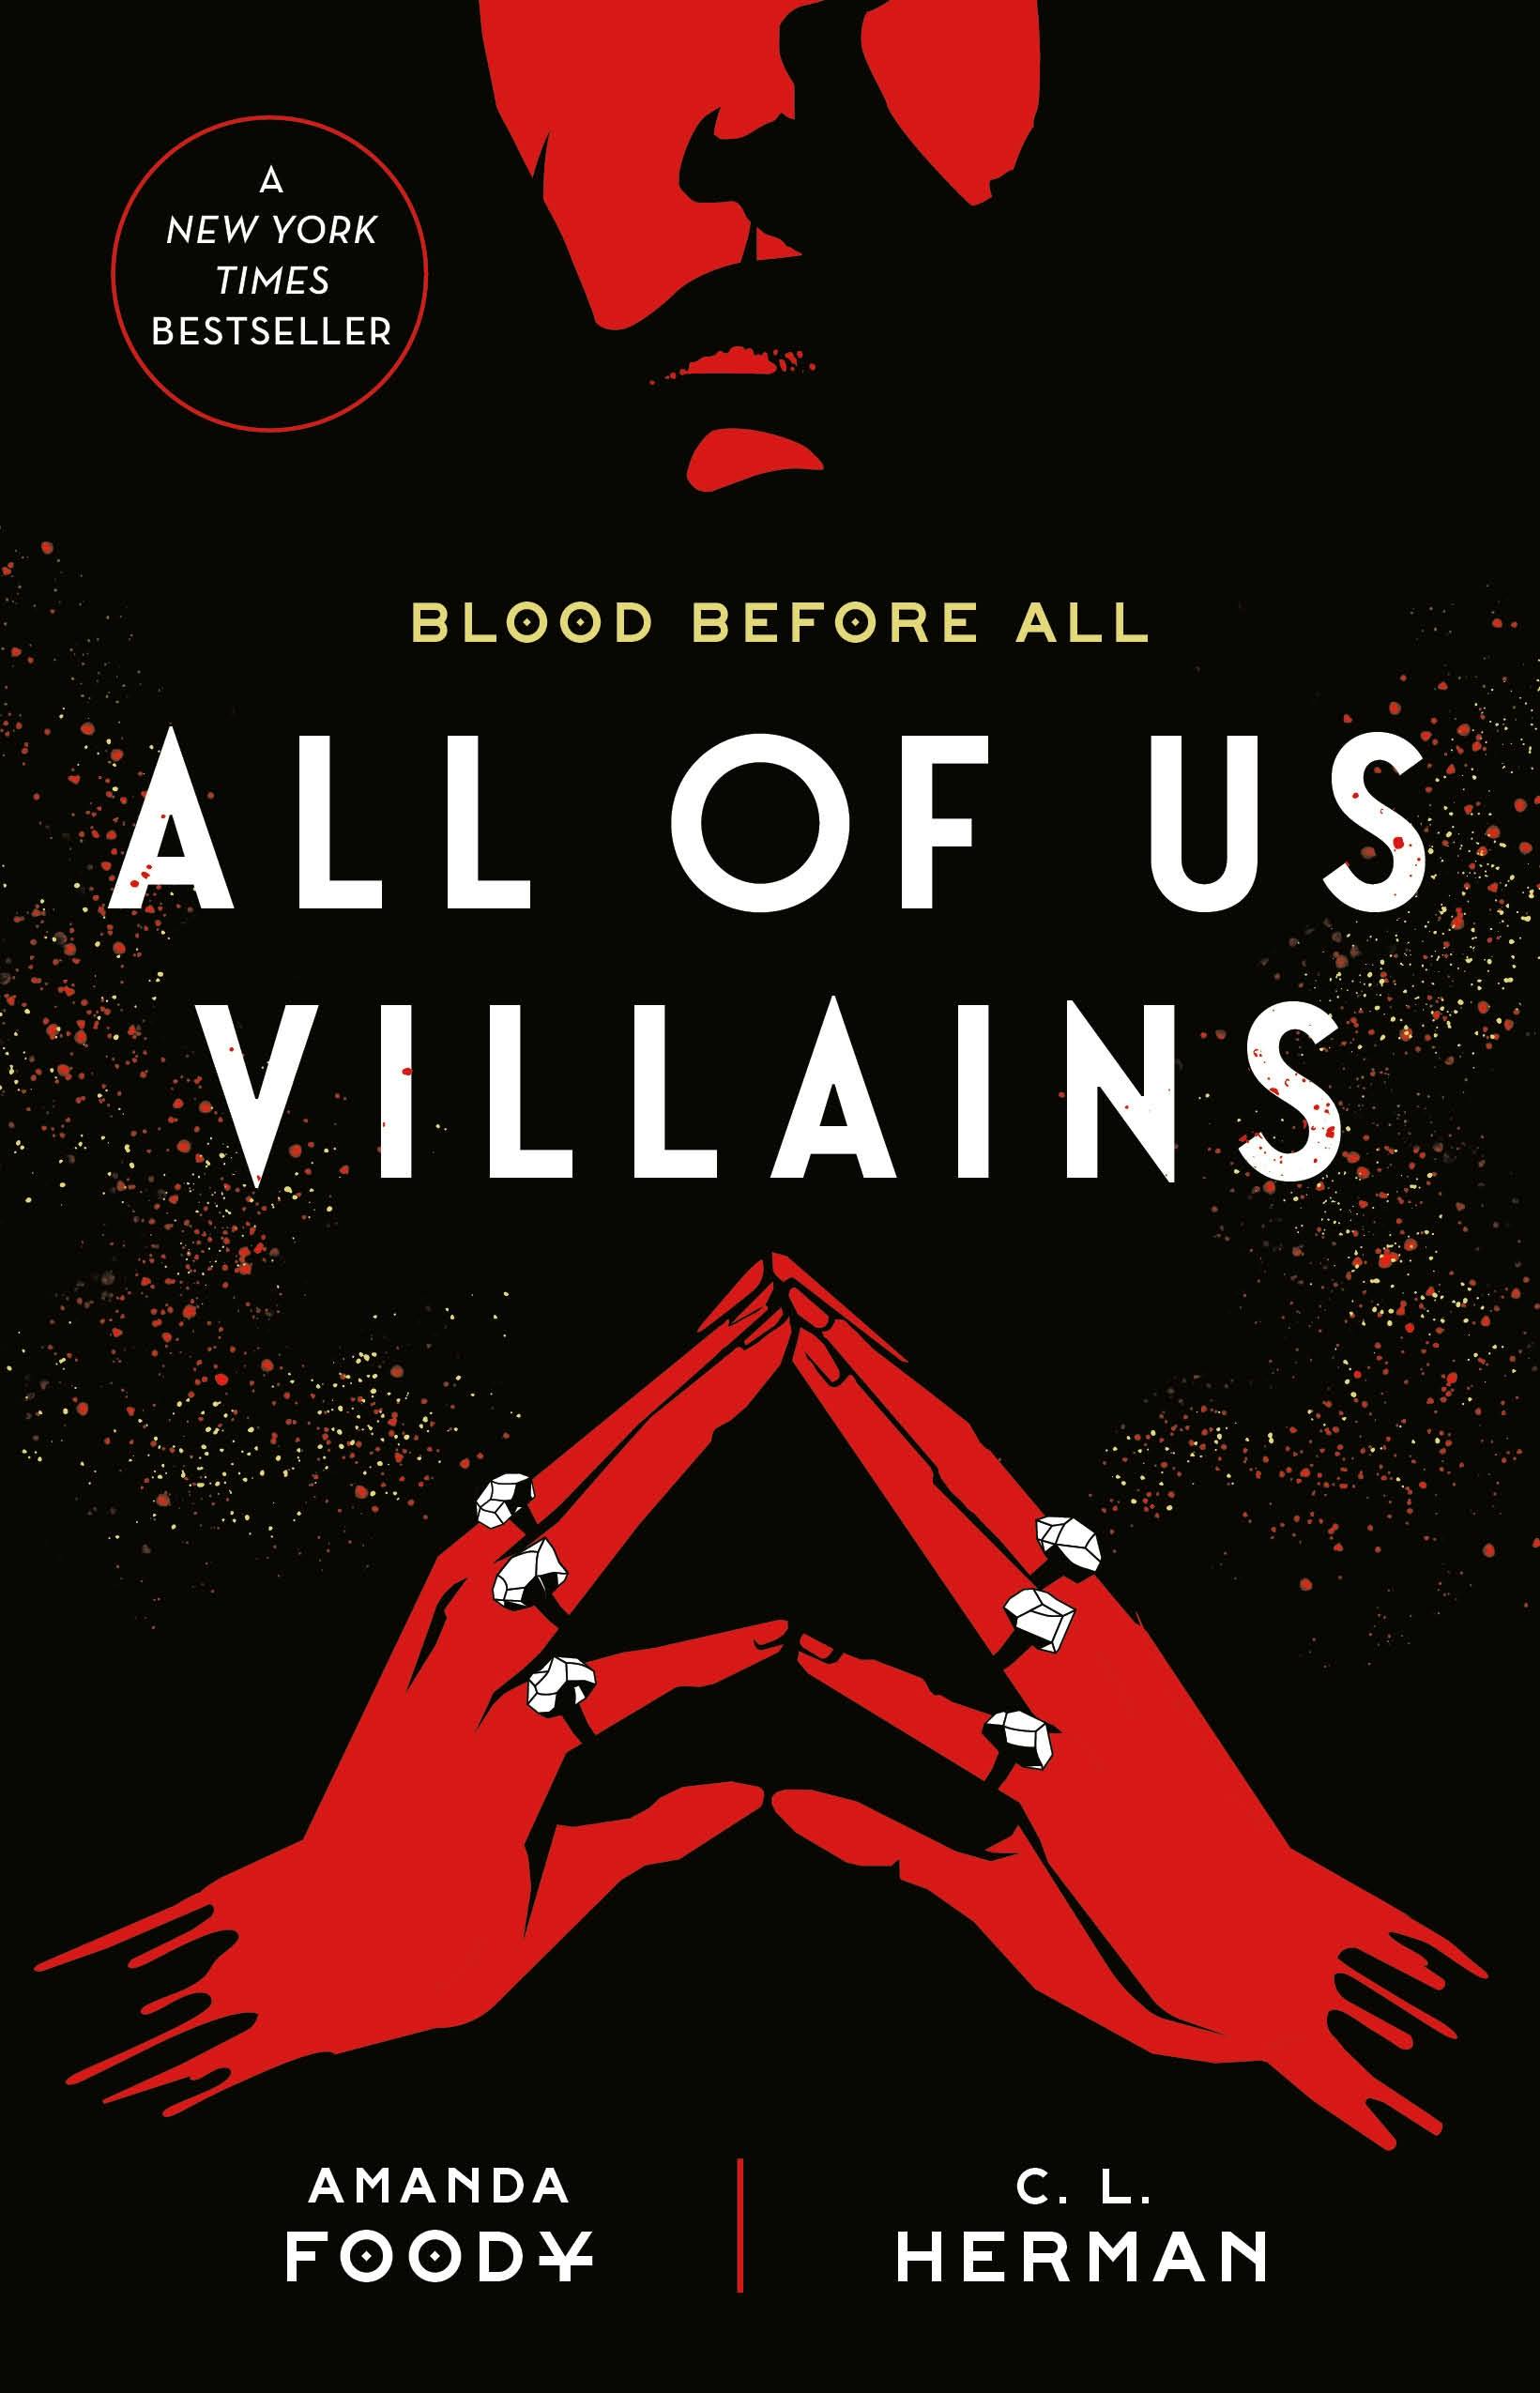 Cover for the book titled as: All of Us Villains